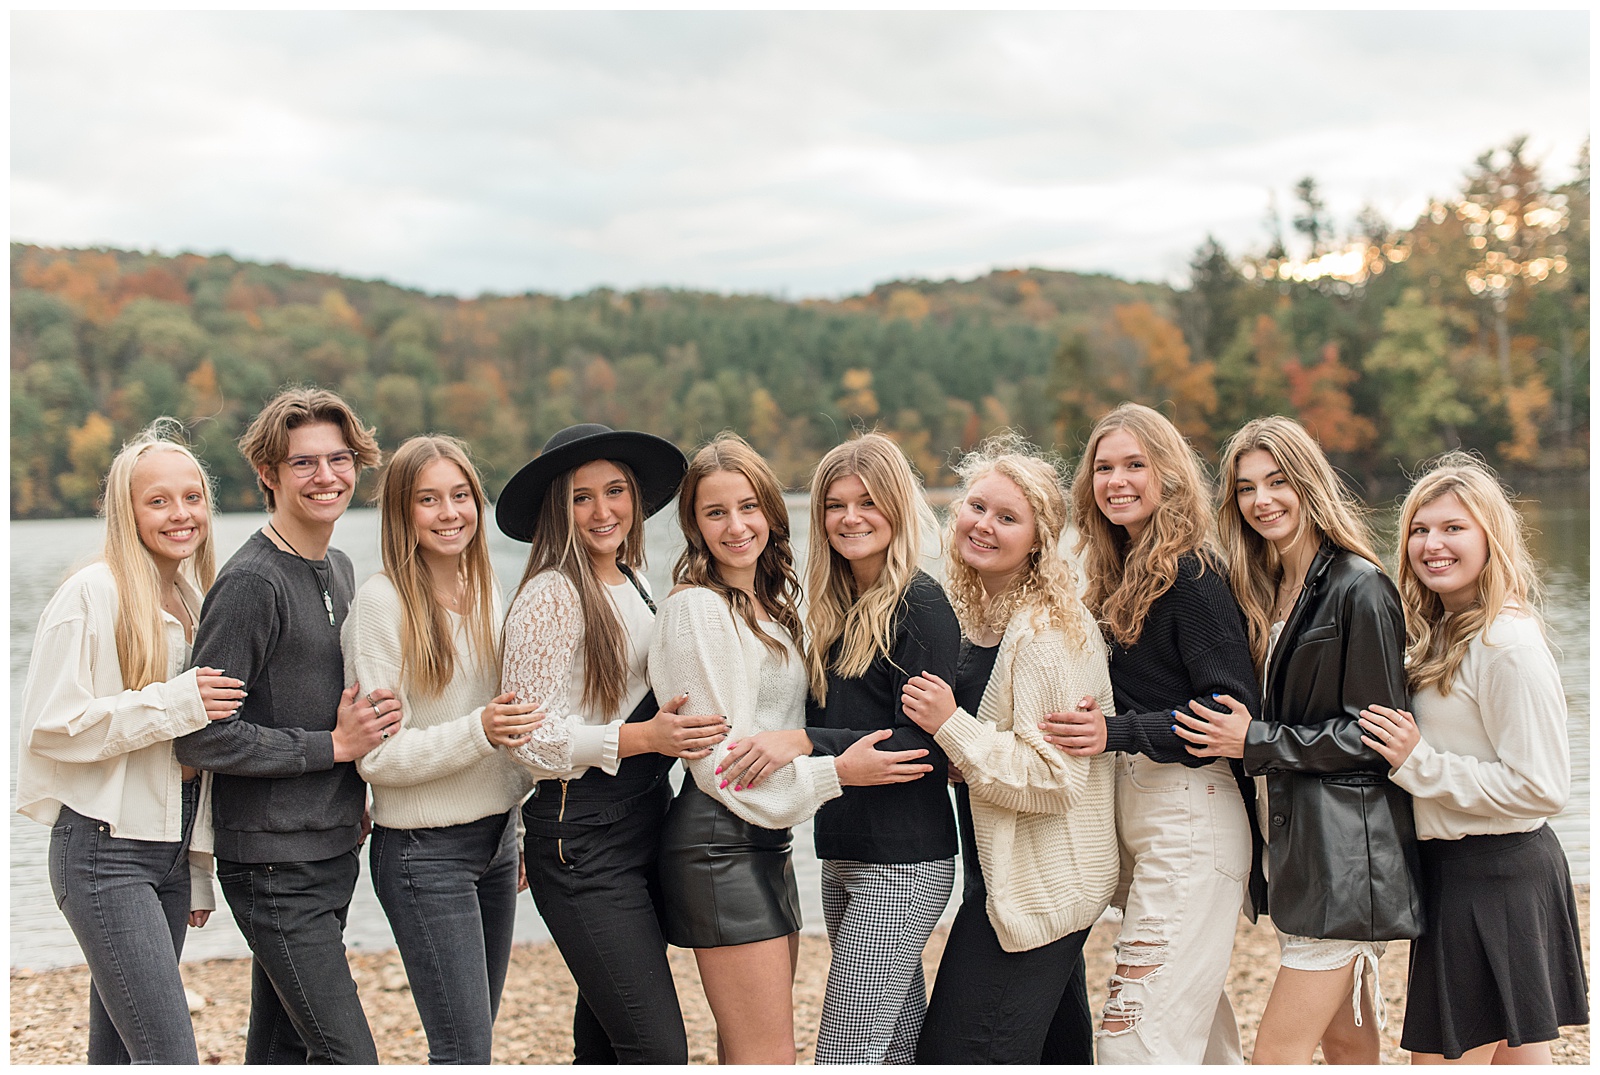 class of 2022 senior spokesmodels huddled close together resting hand on arm of person in front of them while smiling at camera by lake at reservoir park